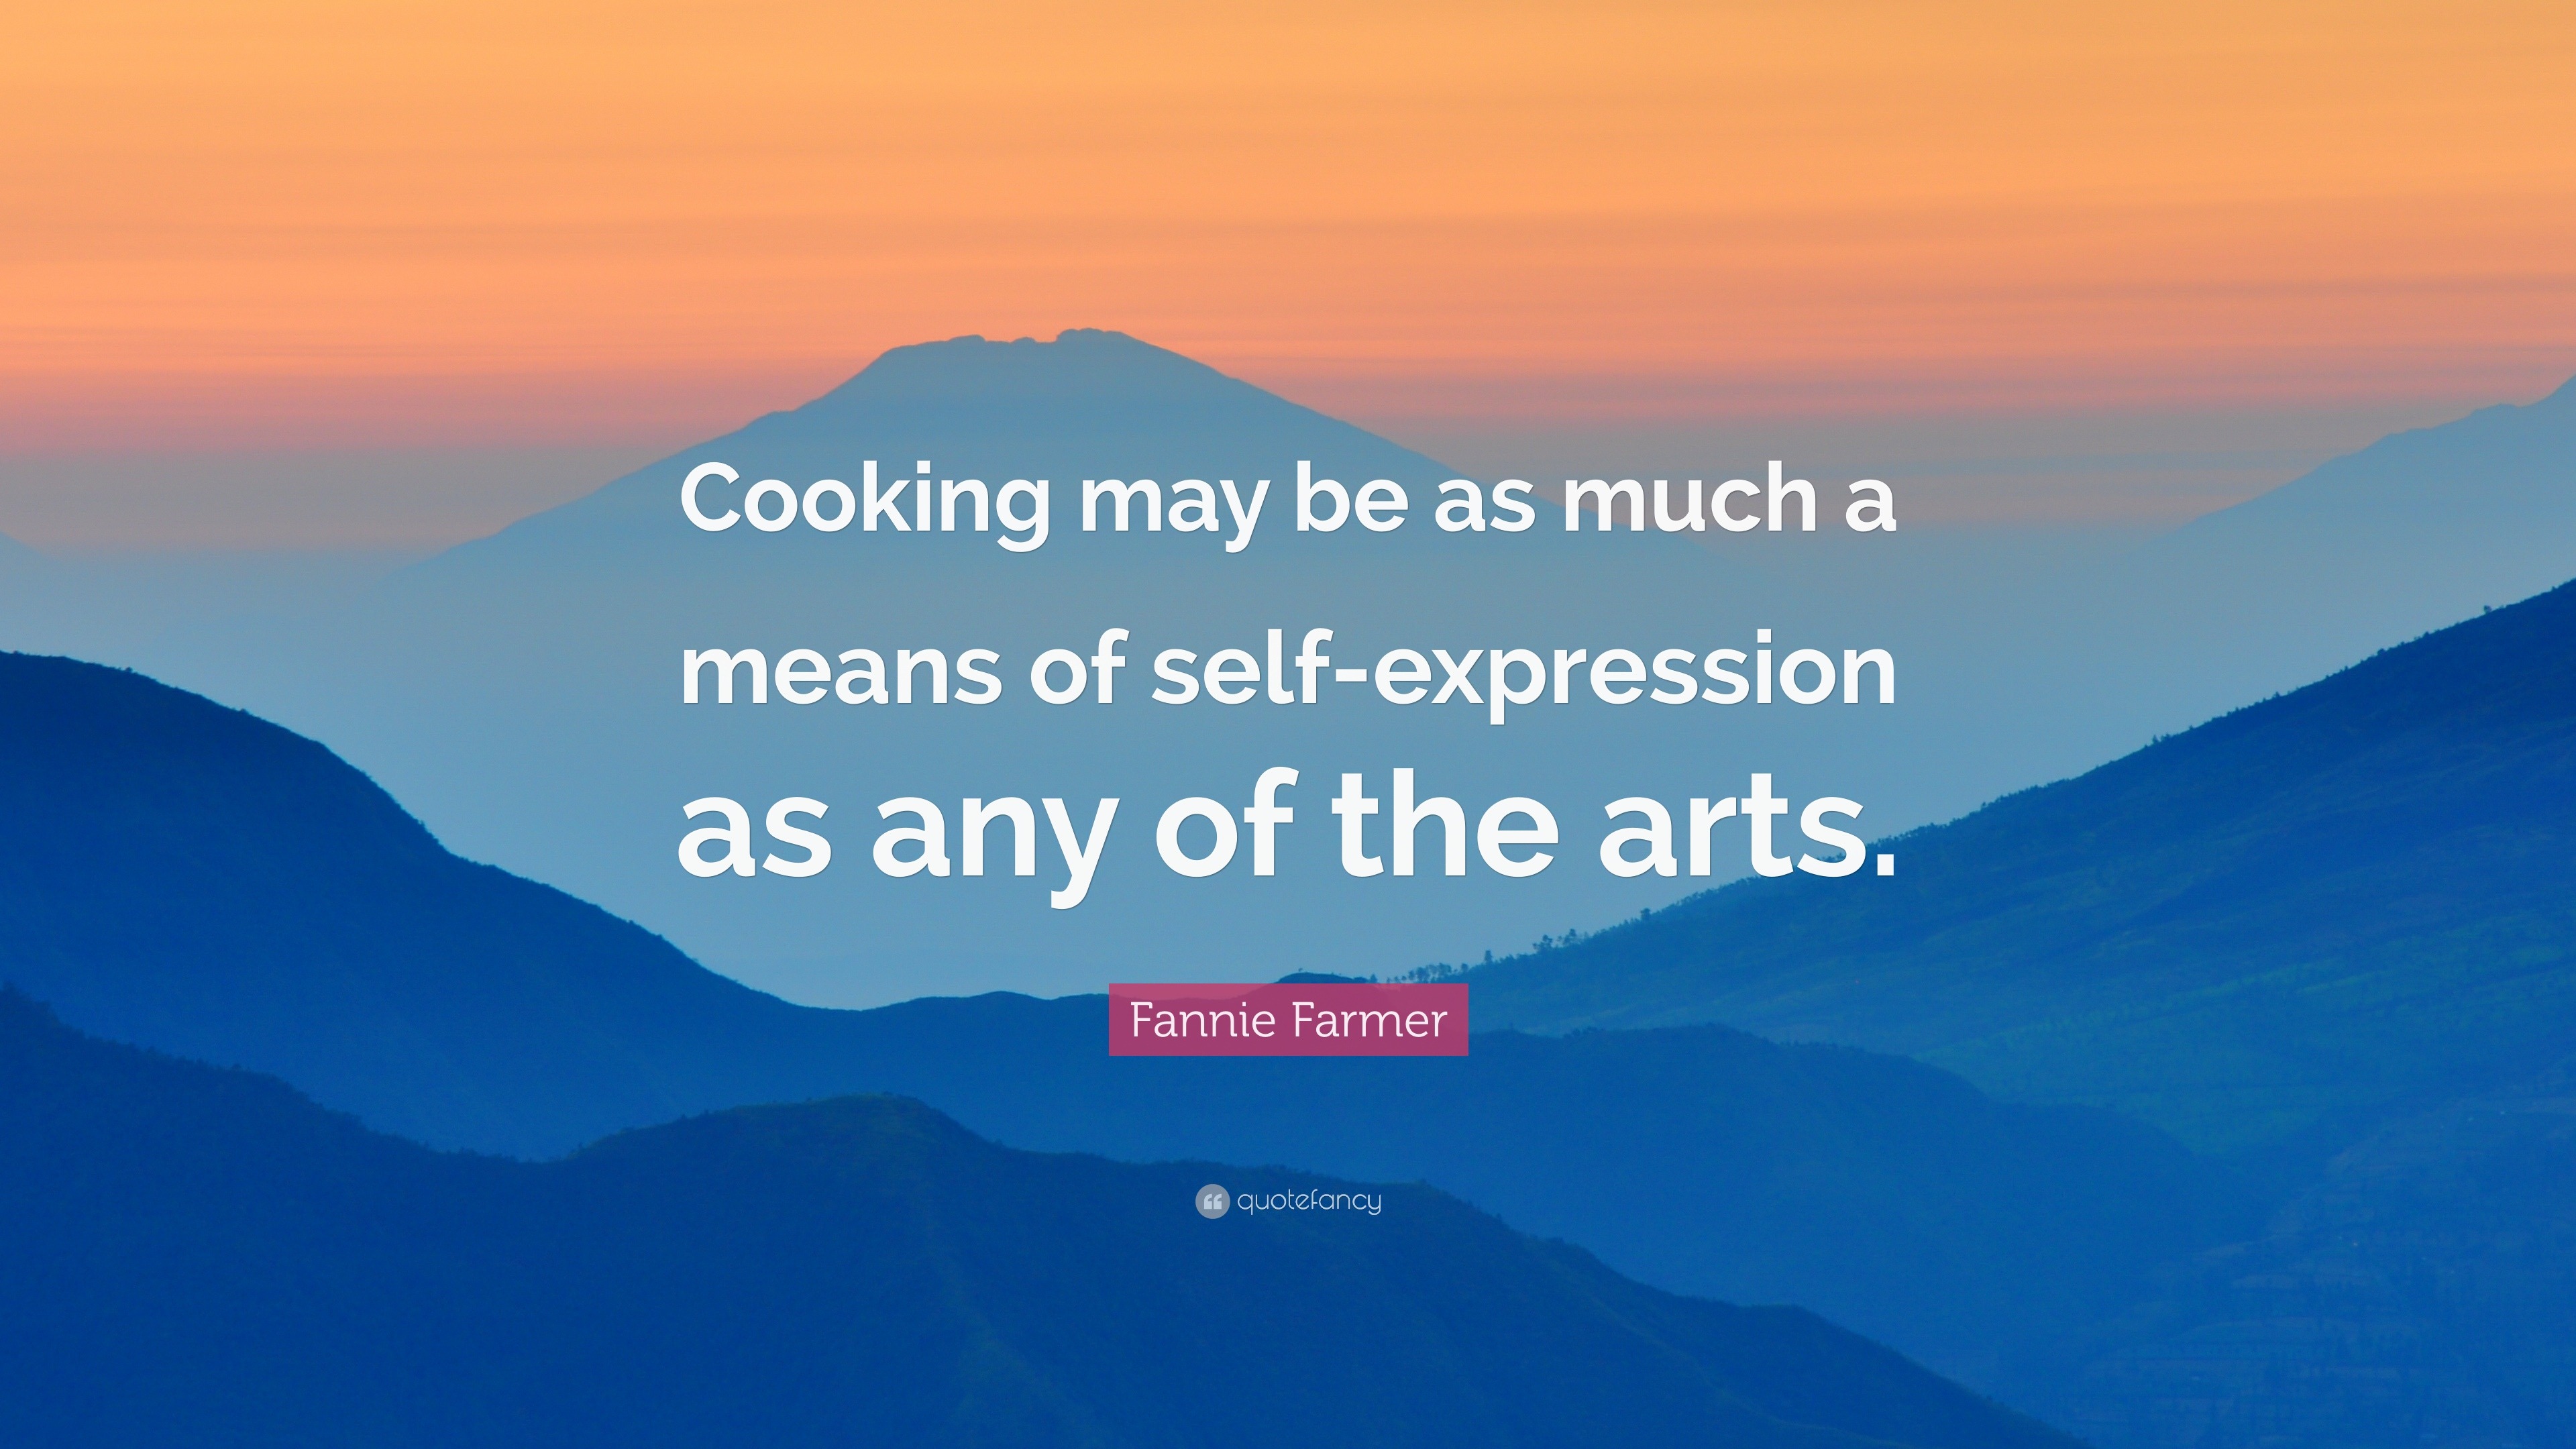 Fannie Farmer Quote: “Cooking may be as much a means of self-expression